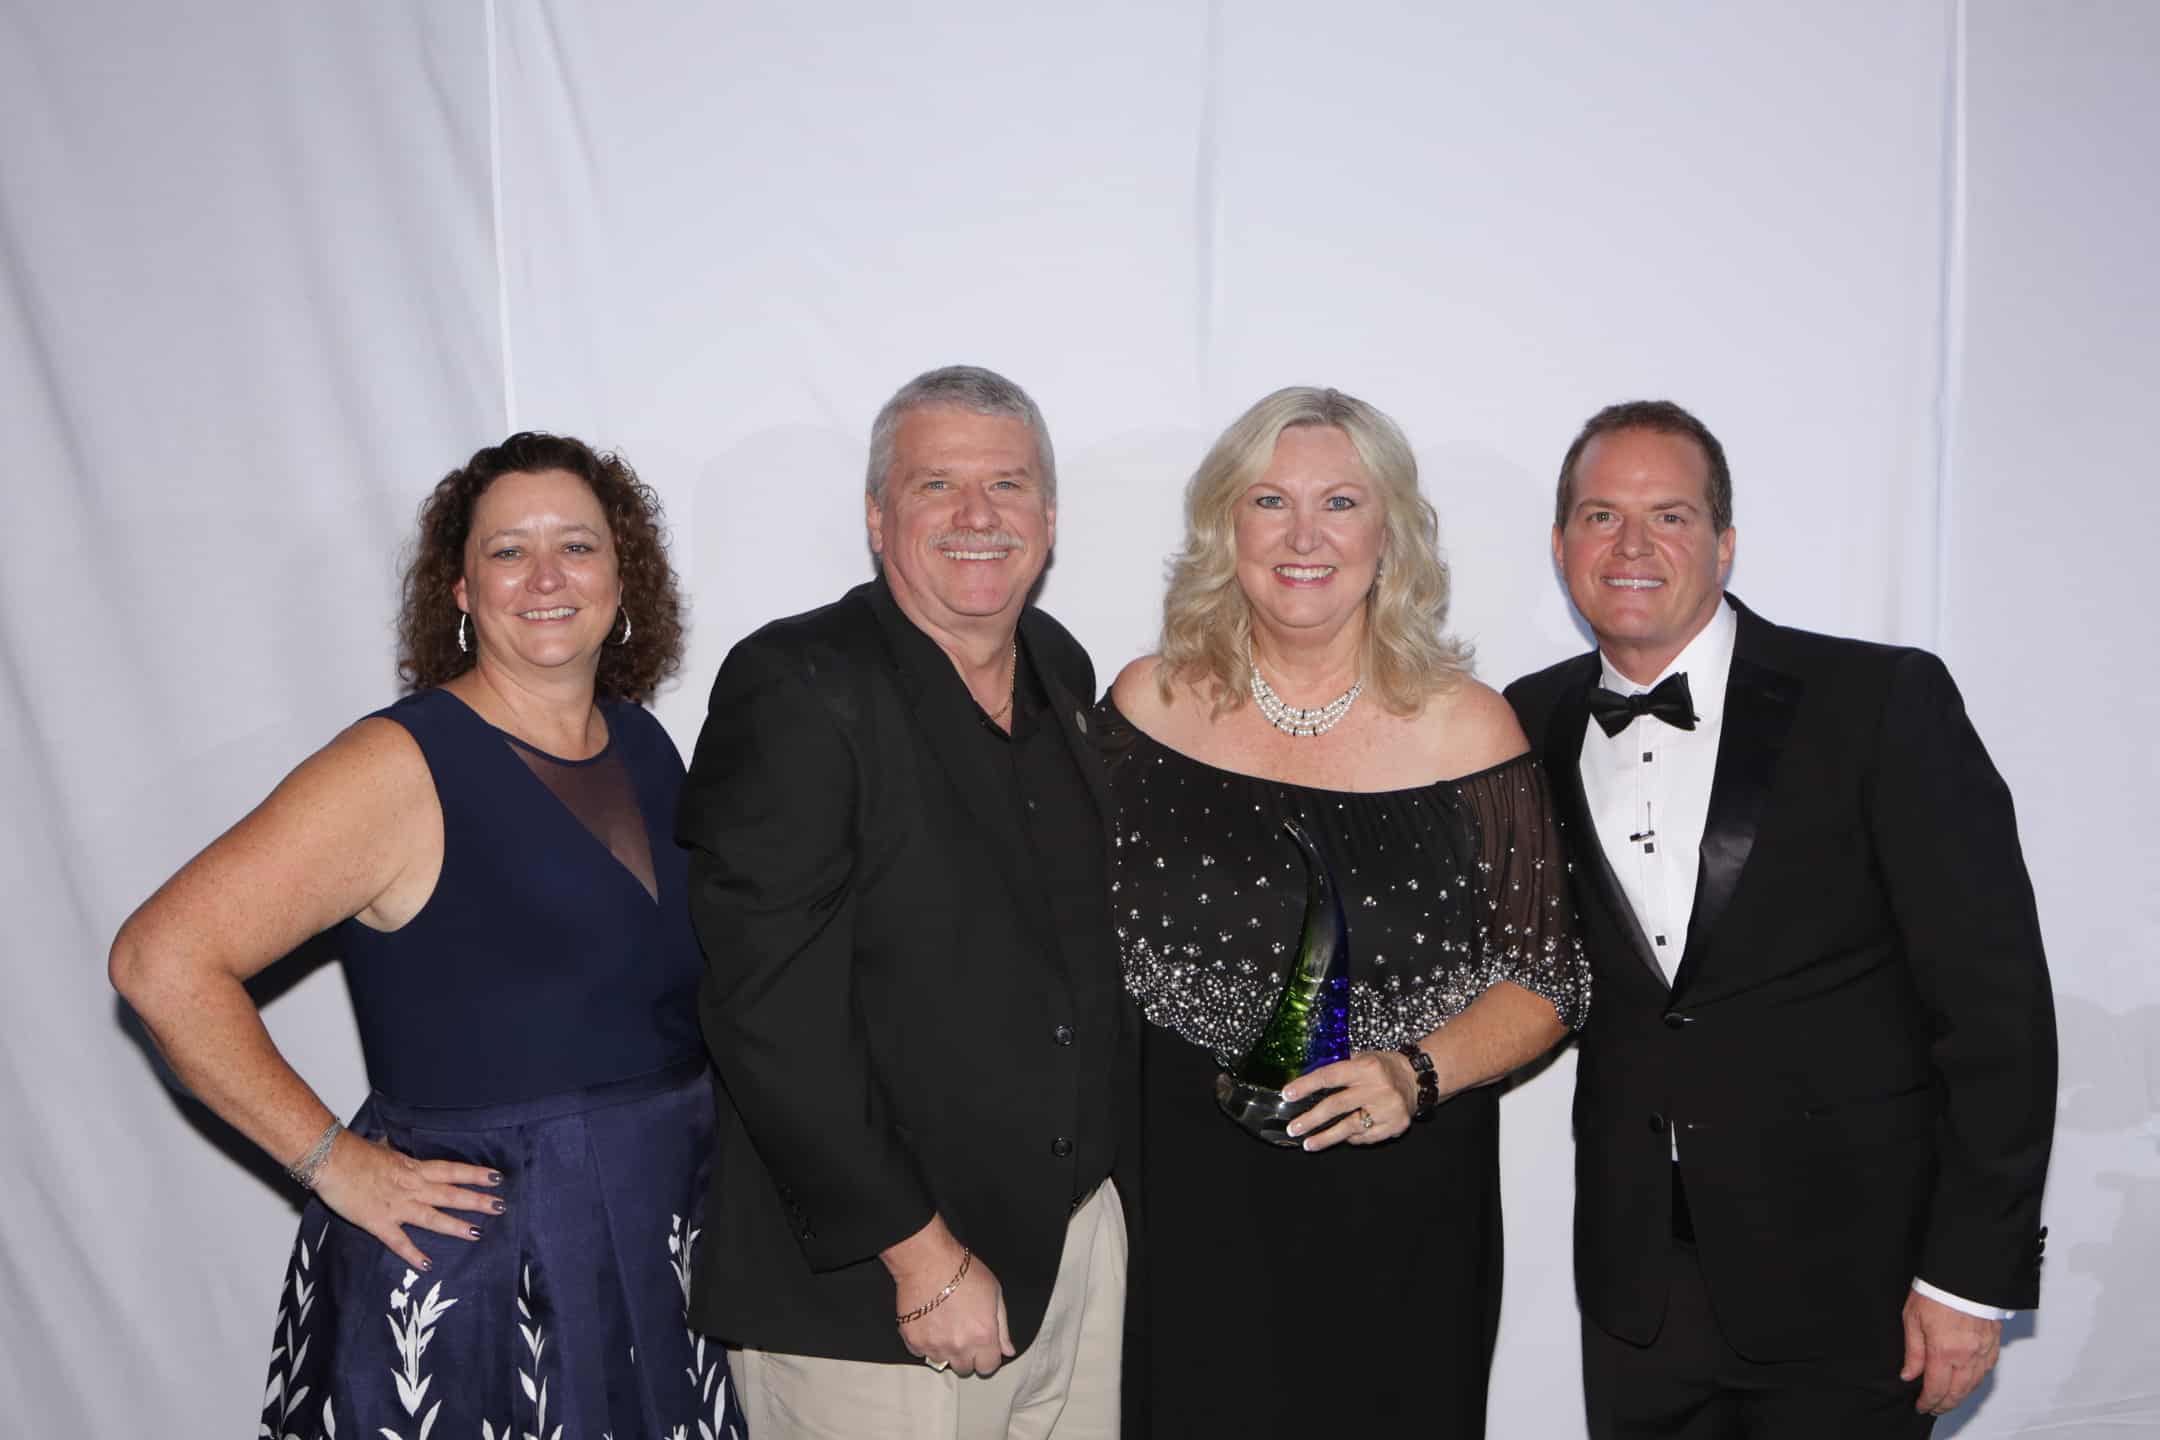 Dream Vacations Franchise - Franchise of the Year Award